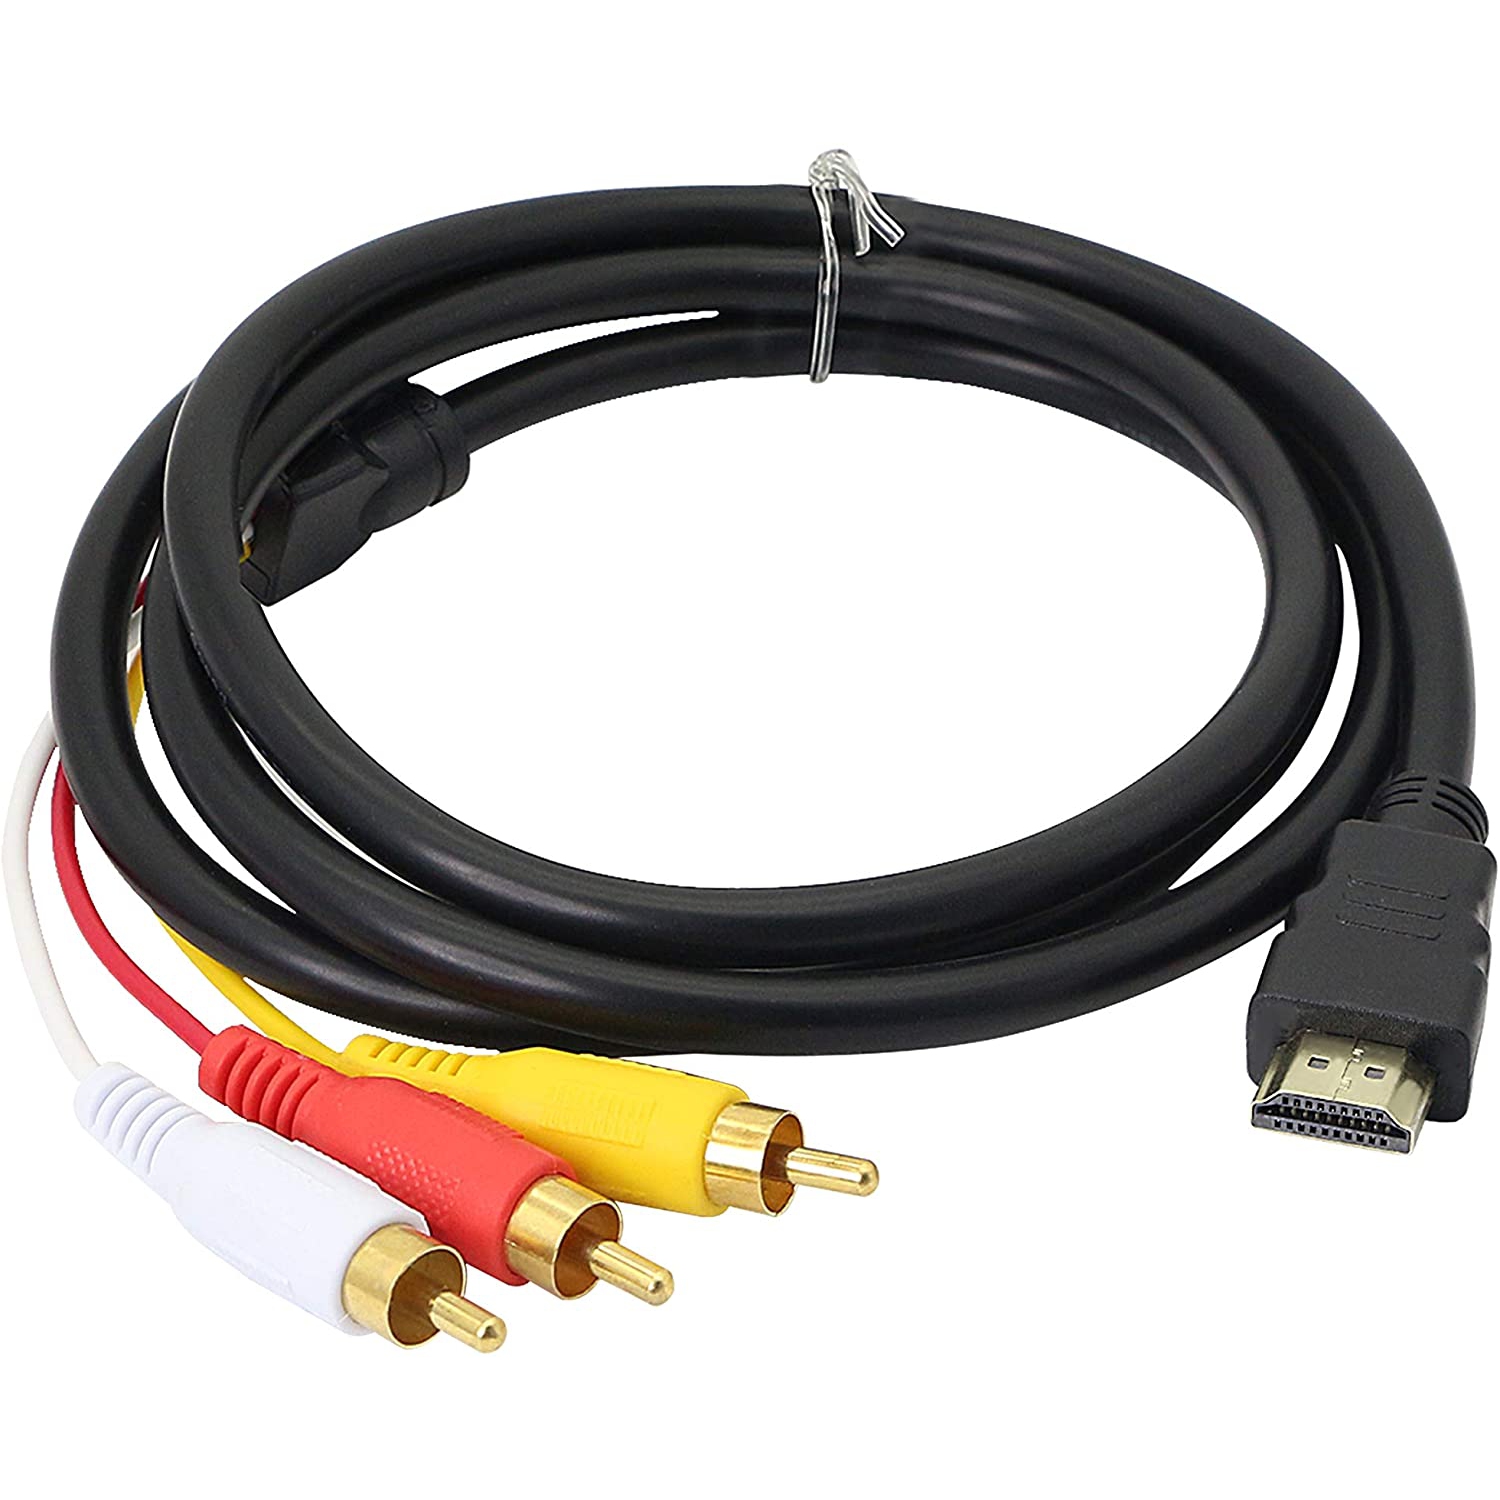 1.5m HDMI Male to 3 RCA Adapter Cable RGB Male AV Video Audio Component Converter HDTV